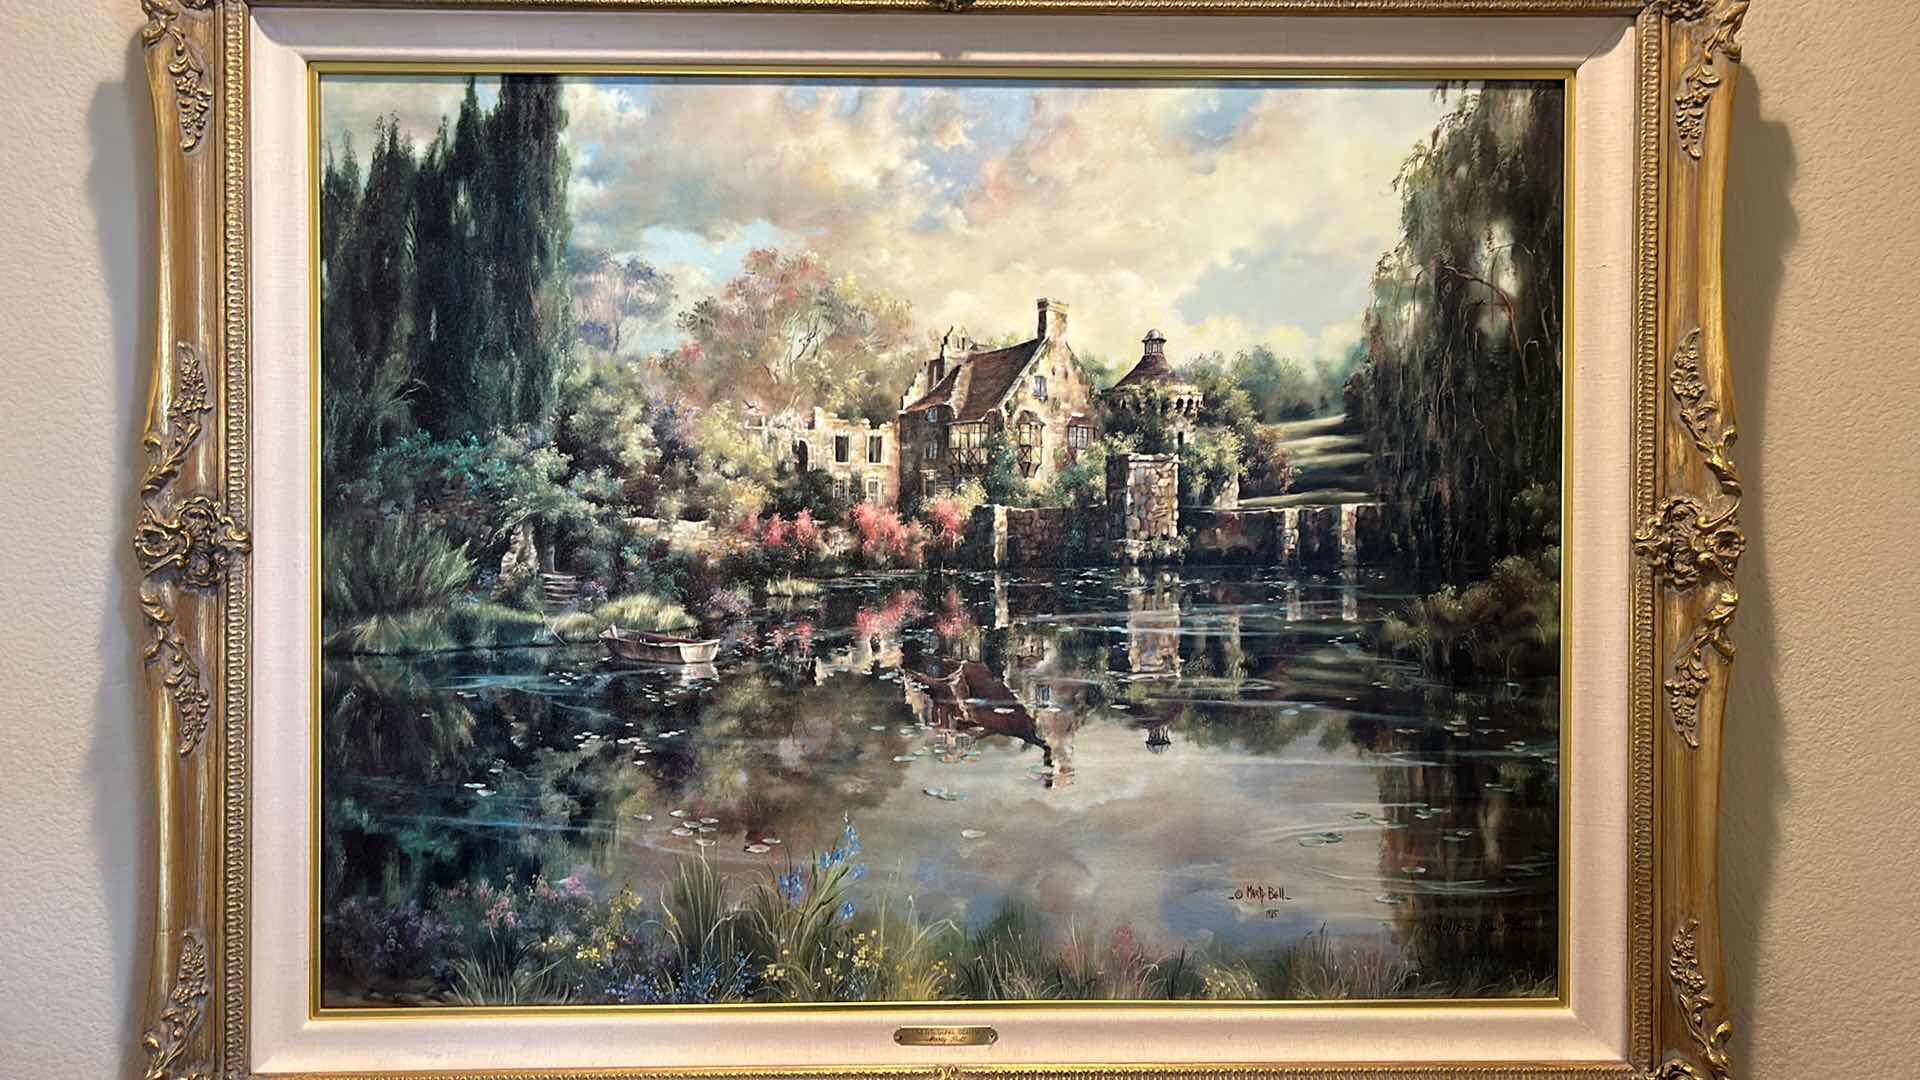 Photo 2 of “SUMMERS SONG, SCOTNEY” BY MARTY BELL PRINT NO 146 WITH COA SINGED ARTWORK ORNATELY FRAMED 43 1/2“ x 34 1/2“ $960